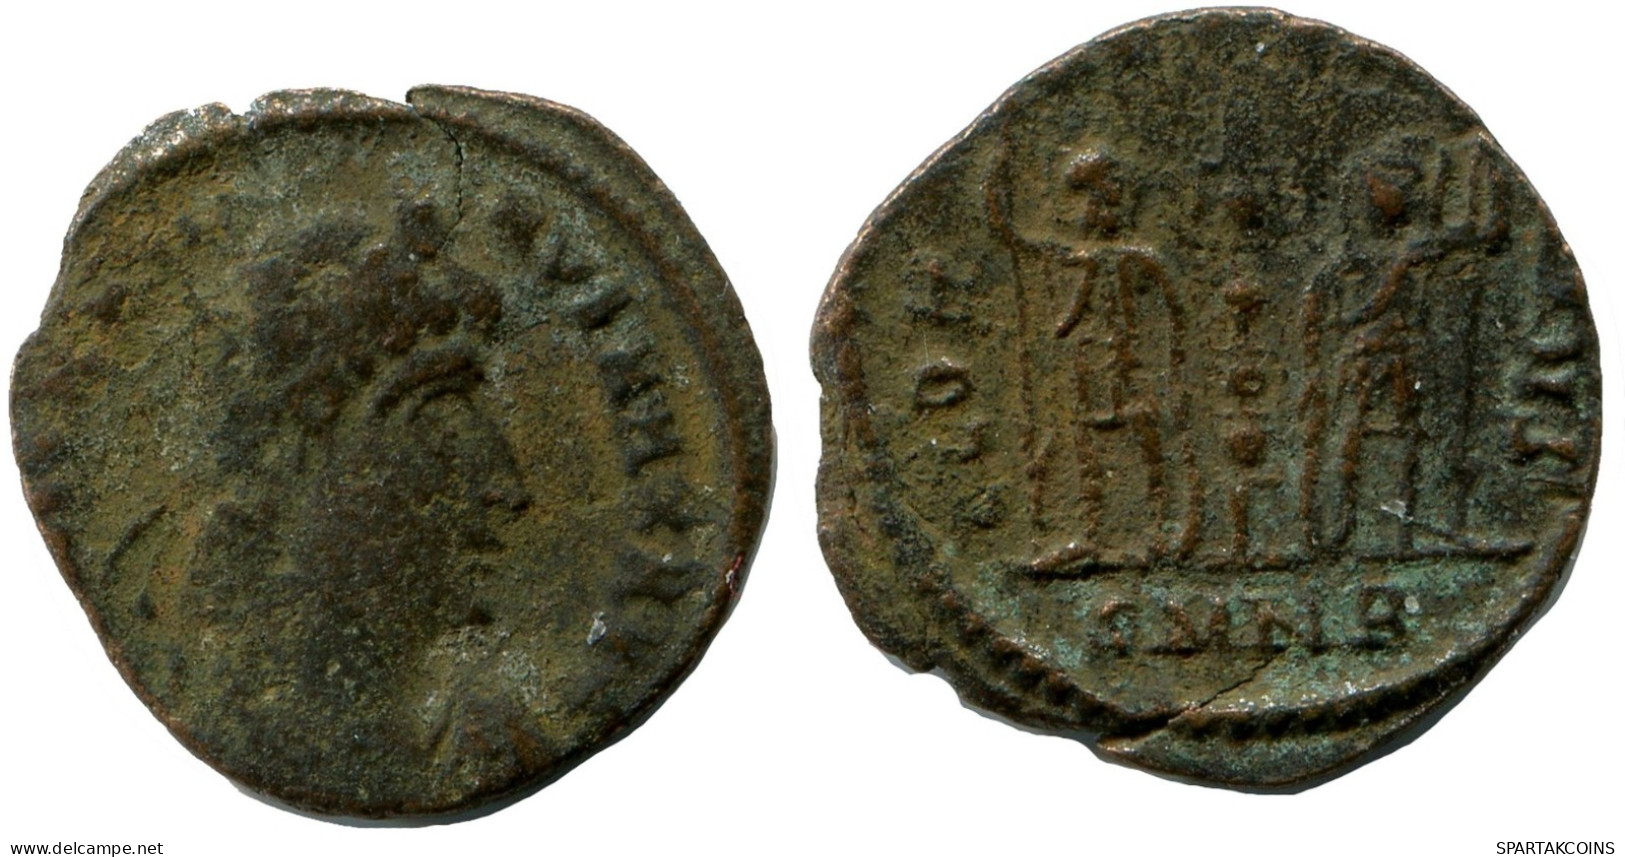 CONSTANTINE I MINTED IN NICOMEDIA FOUND IN IHNASYAH HOARD EGYPT #ANC10860.14.F.A - El Imperio Christiano (307 / 363)